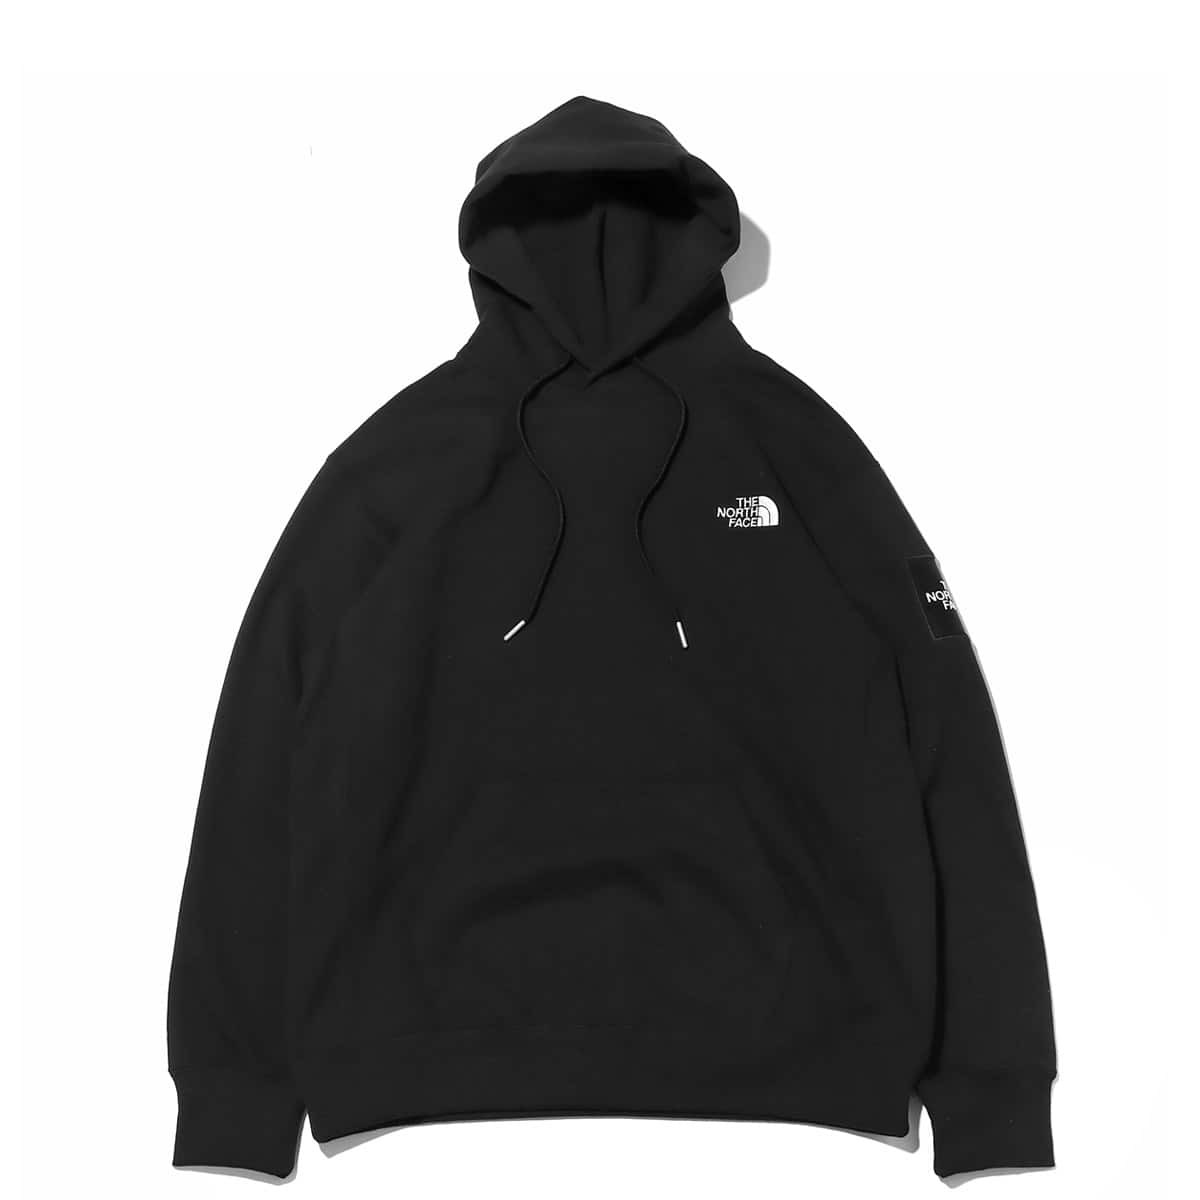 THE NORTH FACE SQUARE LOGO HOODIE BLACK